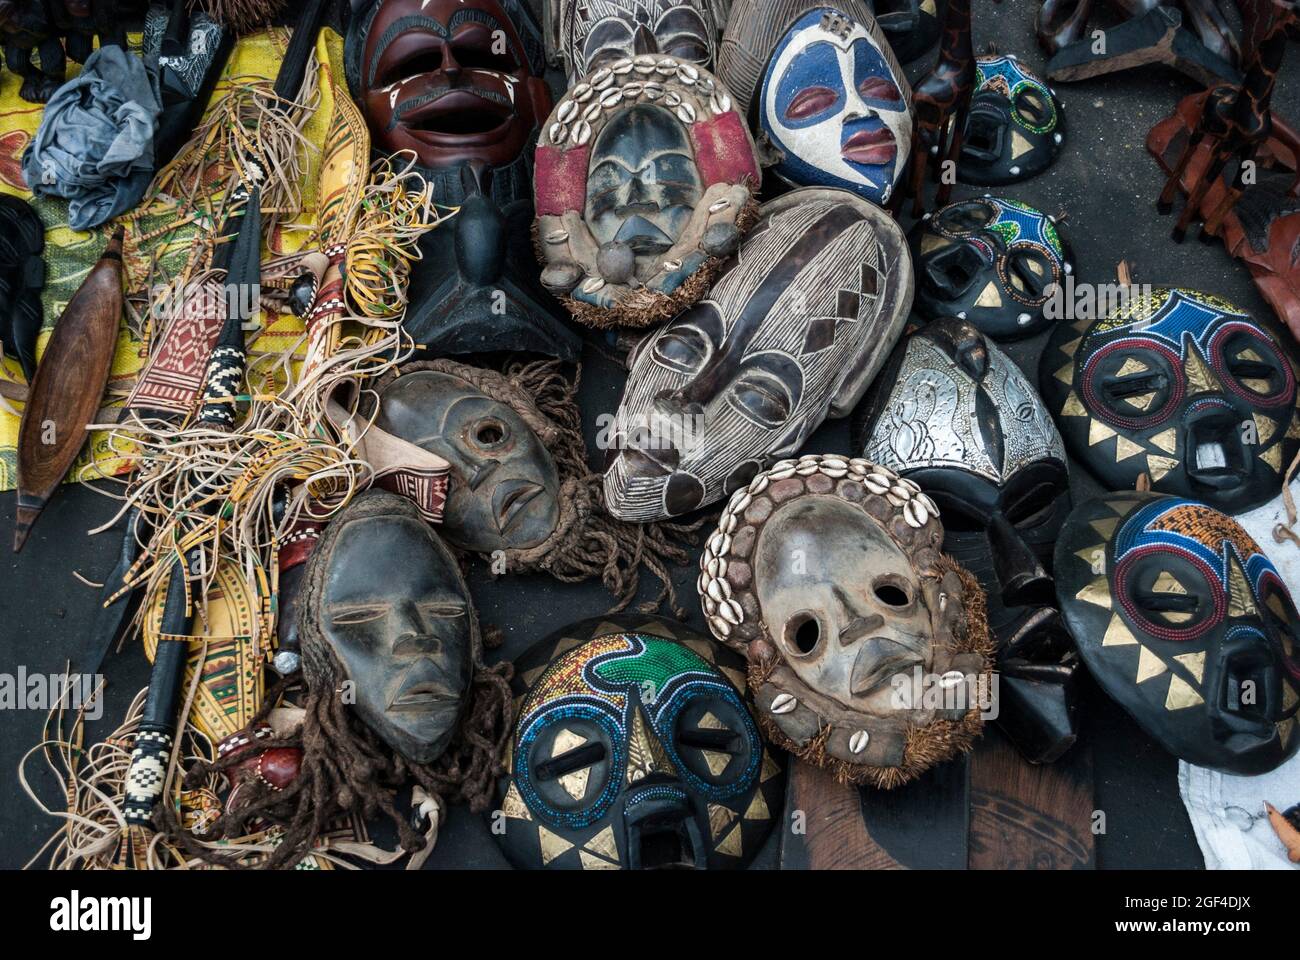 Shopping in the street markets of Banjul. Masks and other wood carvings.  Banjul, The Gambia, Africa Stock Photo - Alamy